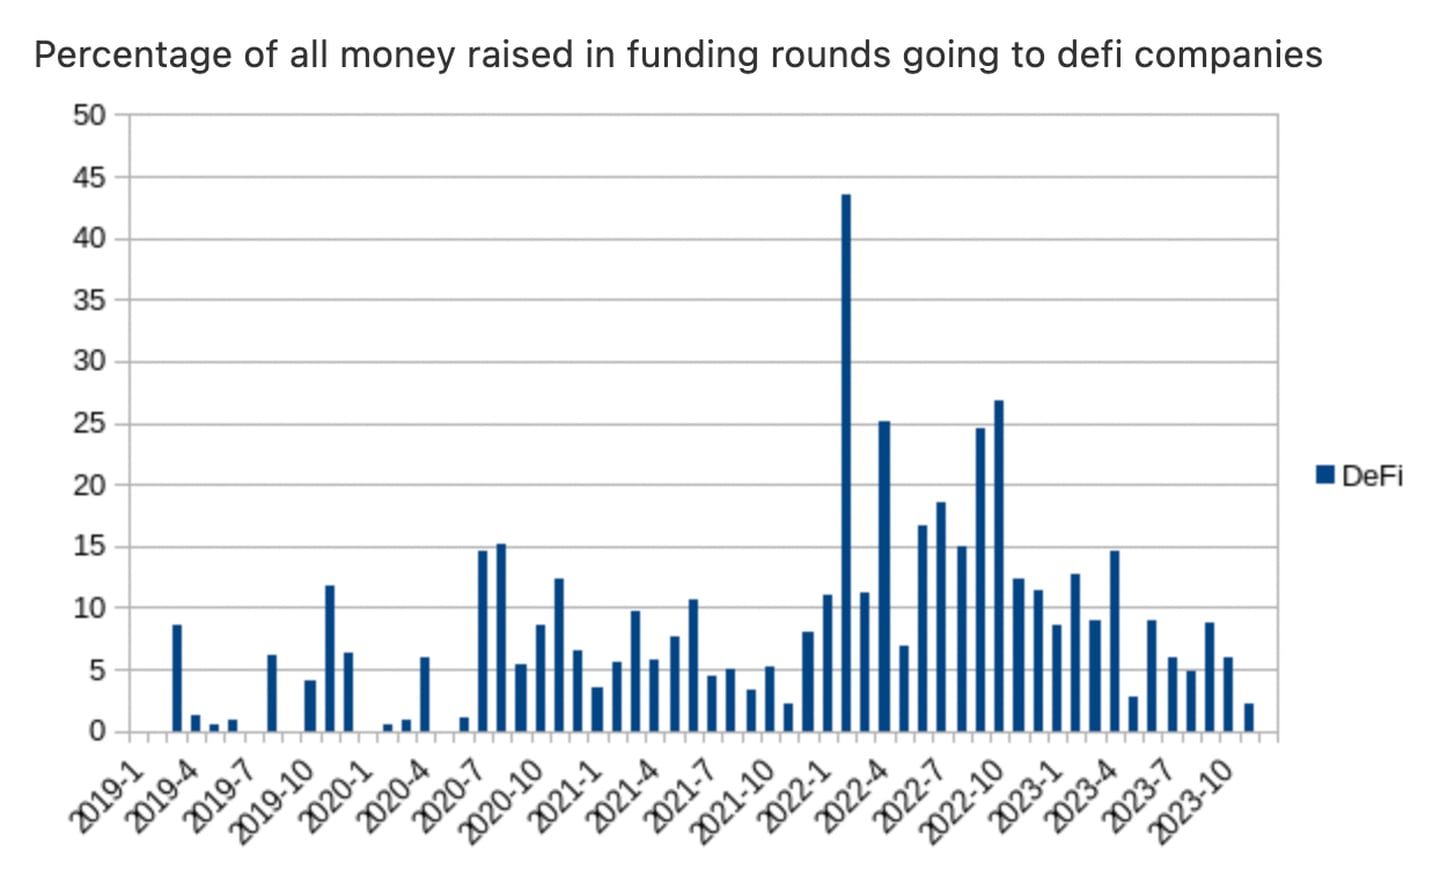 ngmi: Percentage of all money raised going to DeFi companies